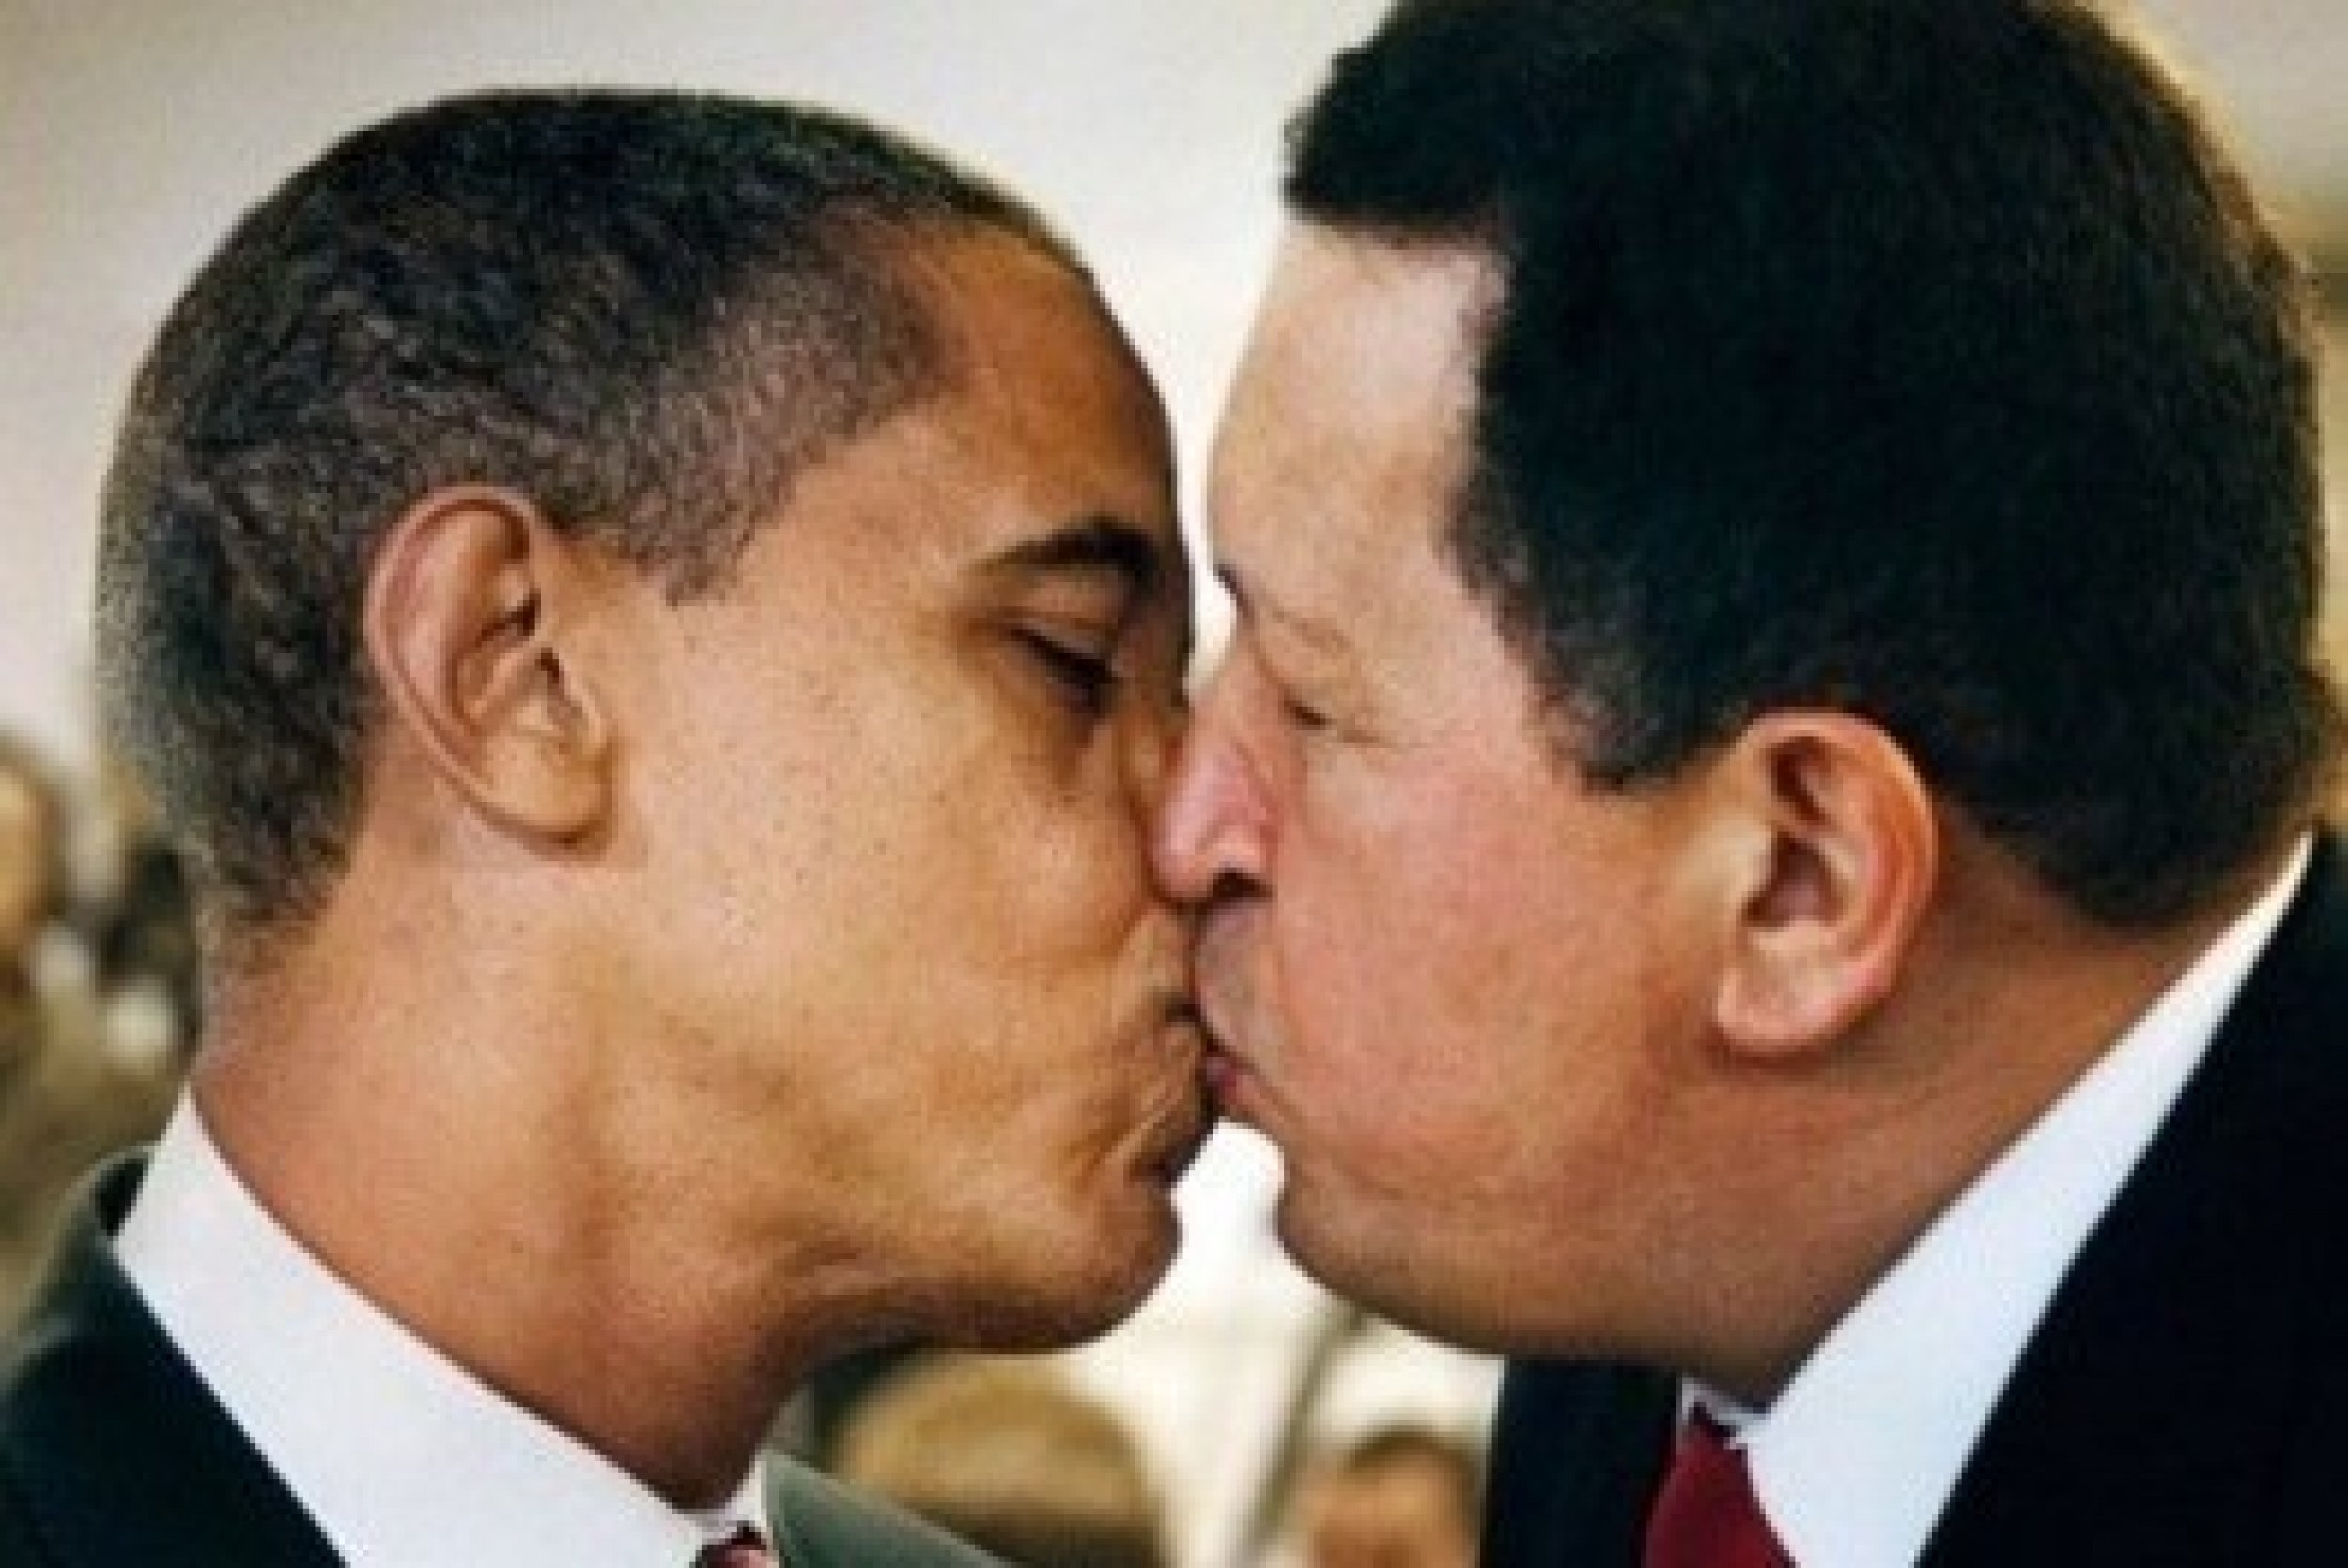 Gag Picture of President Obama Kissing A Politician 